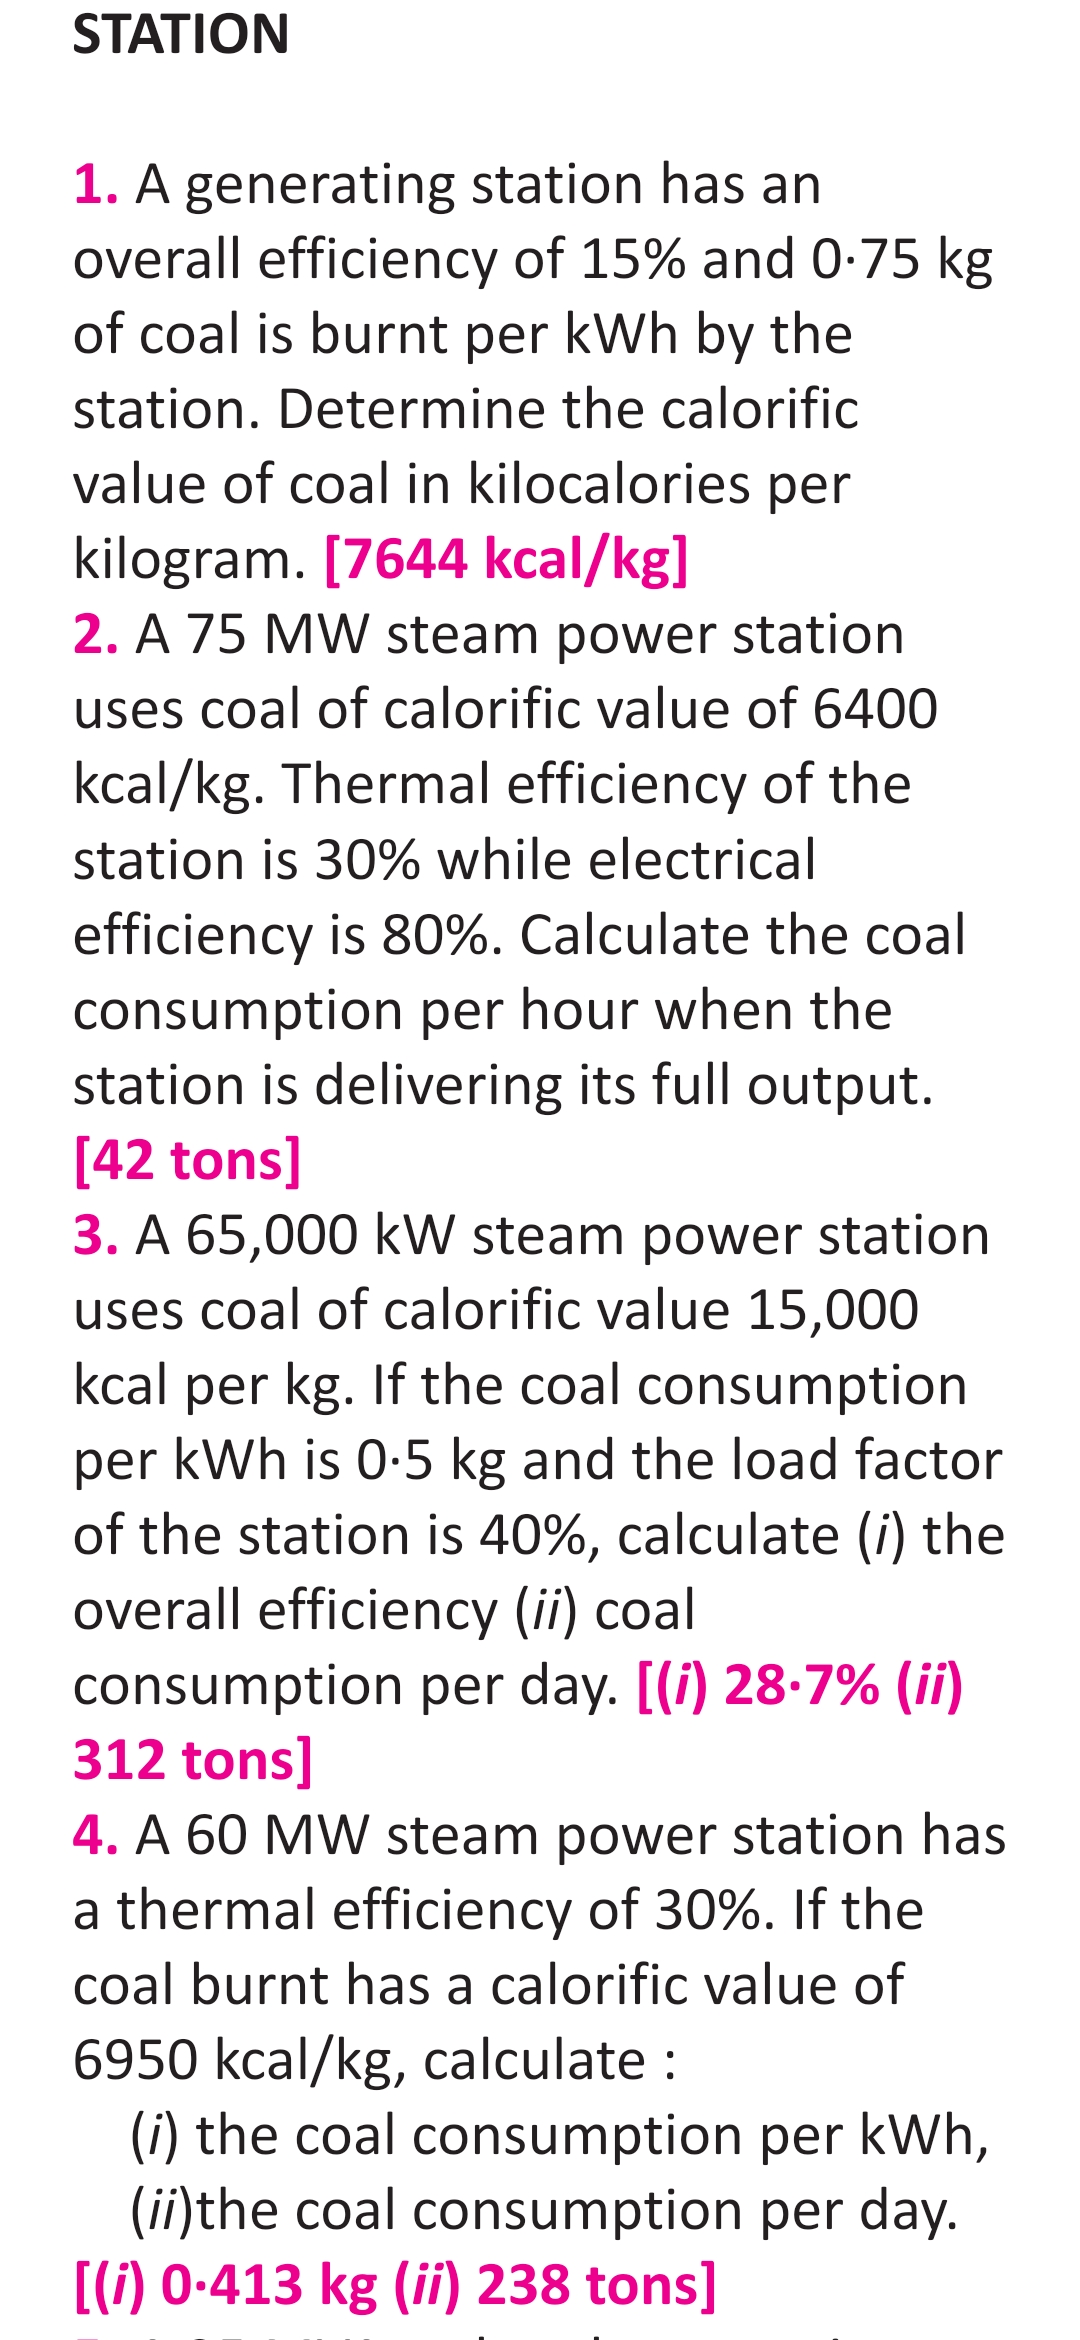 STATION
1. A generating station has an
overall efficiency of 15% and 0-75 kg
of coal is burnt per kWh by the
station. Determine the calorific
value of coal in kilocalories per
kilogram. [7644 kcal/kg]
2. A 75 MW steam power station
uses coal of calorific value of 6400
kcal/kg. Thermal efficiency of the
station is 30% while electrical
efficiency is 80%. Calculate the coal
consumption per hour when the
station is delivering its full output.
[42 tons]
3. A 65,000 kW steam power station
uses coal of calorific value 15,000
kcal per kg. If the coal consumption
kWh is 0-5 kg and the load factor
of the station is 40%, calculate (i) the
overall efficiency (ii) coal
per
consumption per day. [(i) 28.7% (ii)
312 tons]
4. A 60 MW steam power station has
a thermal efficiency of 30%. If the
coal burnt has a calorific value of
6950 kcal/kg, calculate :
(i) the coal consumption per kWh,
(ii)the coal consumption per day.
[(i) 0-413 kg (ii) 238 tons]
